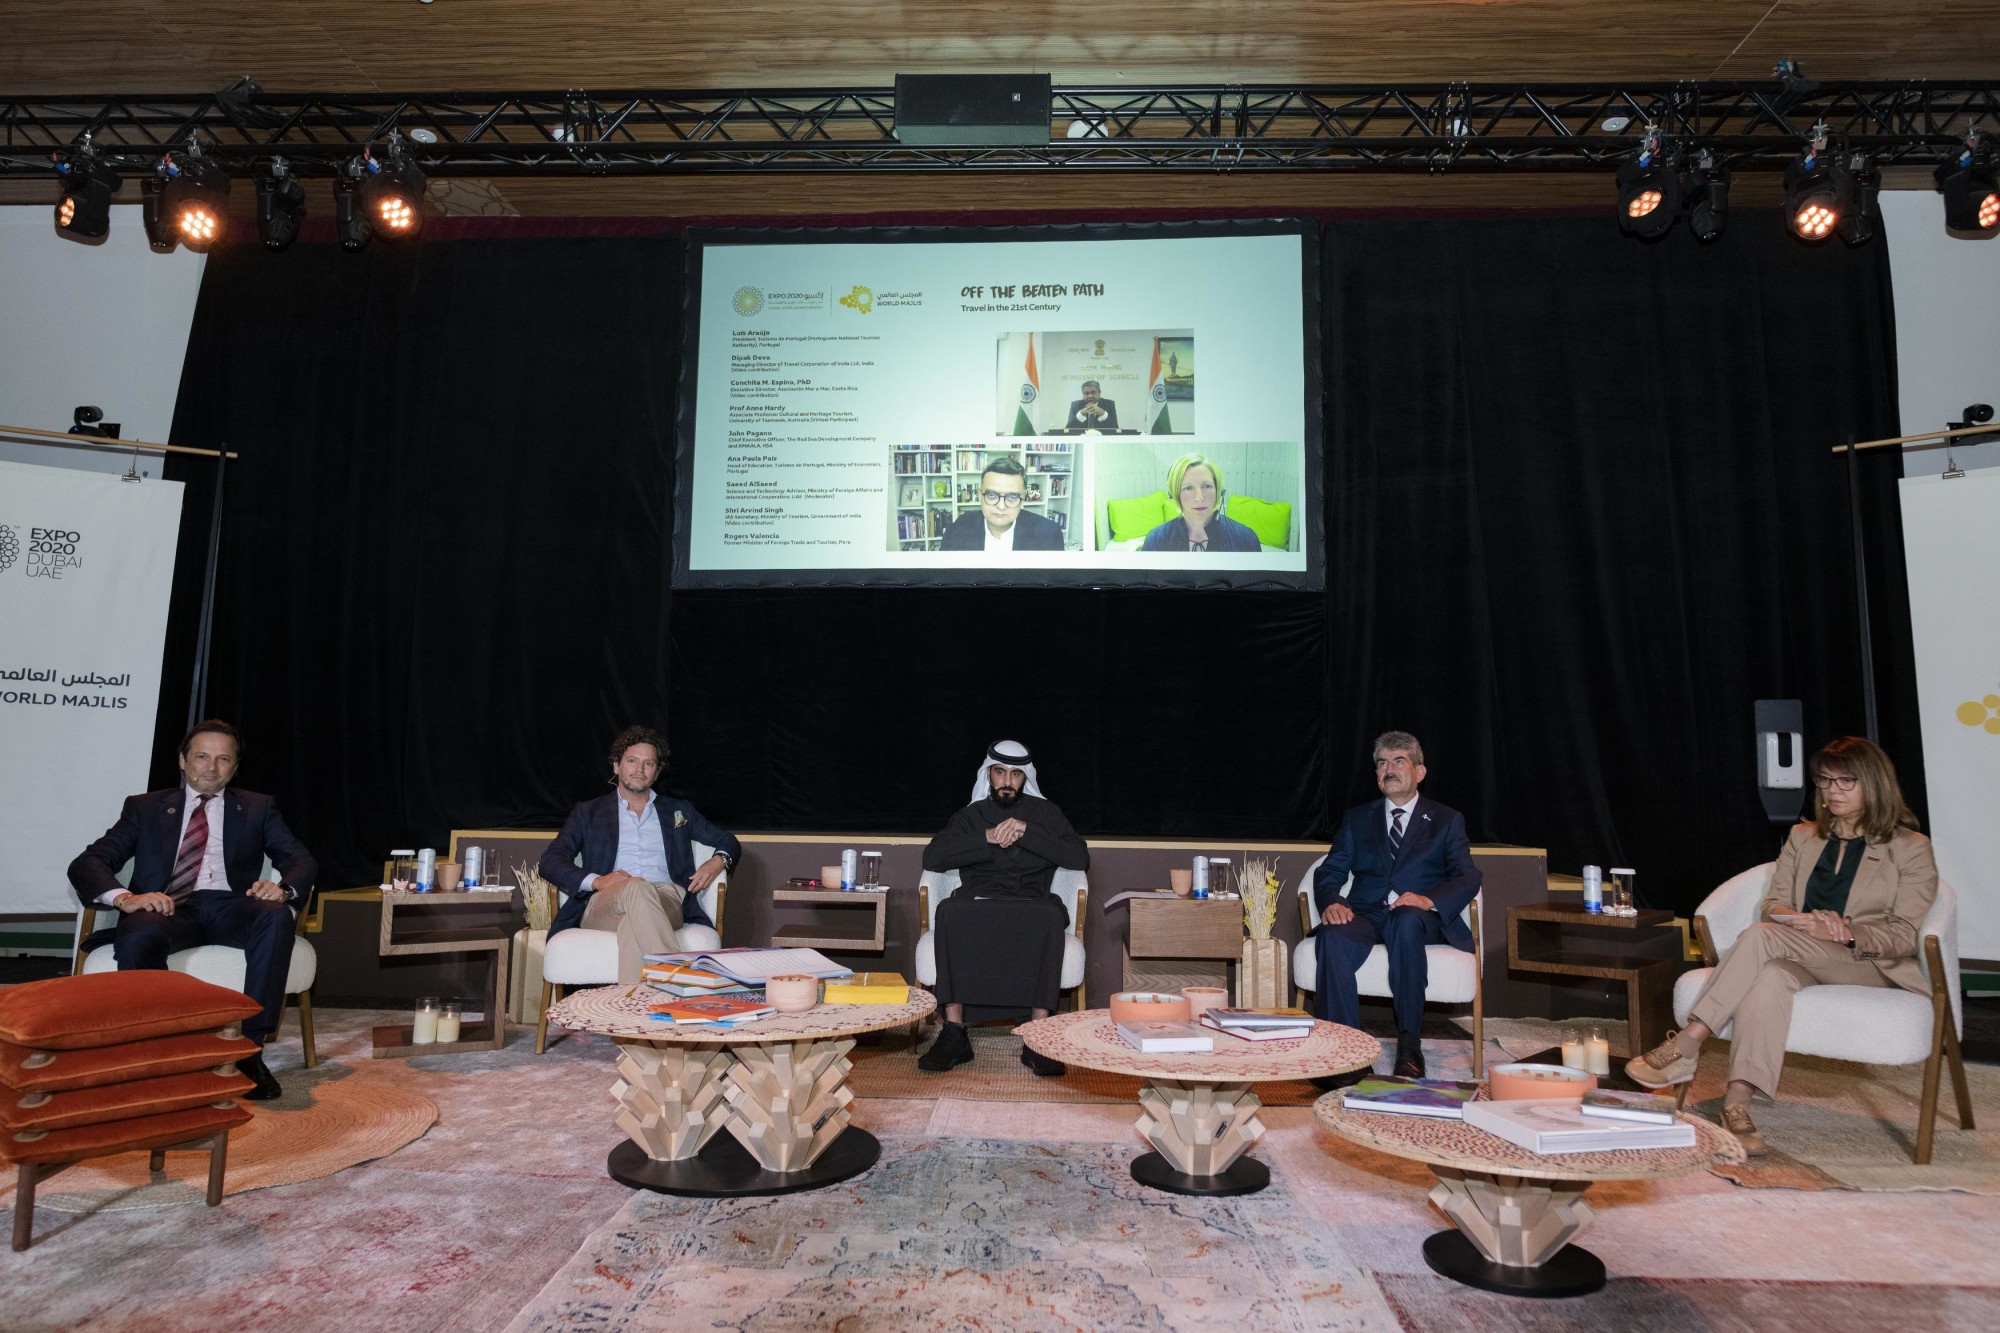 John Pagano (L1), Chief Executive Officer, The Red Sea Development Company and AMAALA, KSA, Luis Araujo (L2), President of Turismo de Portugal, Portuguese National Tourism Authority, Portugal, Saeed Al Saeed (C), Science and Technology Advis